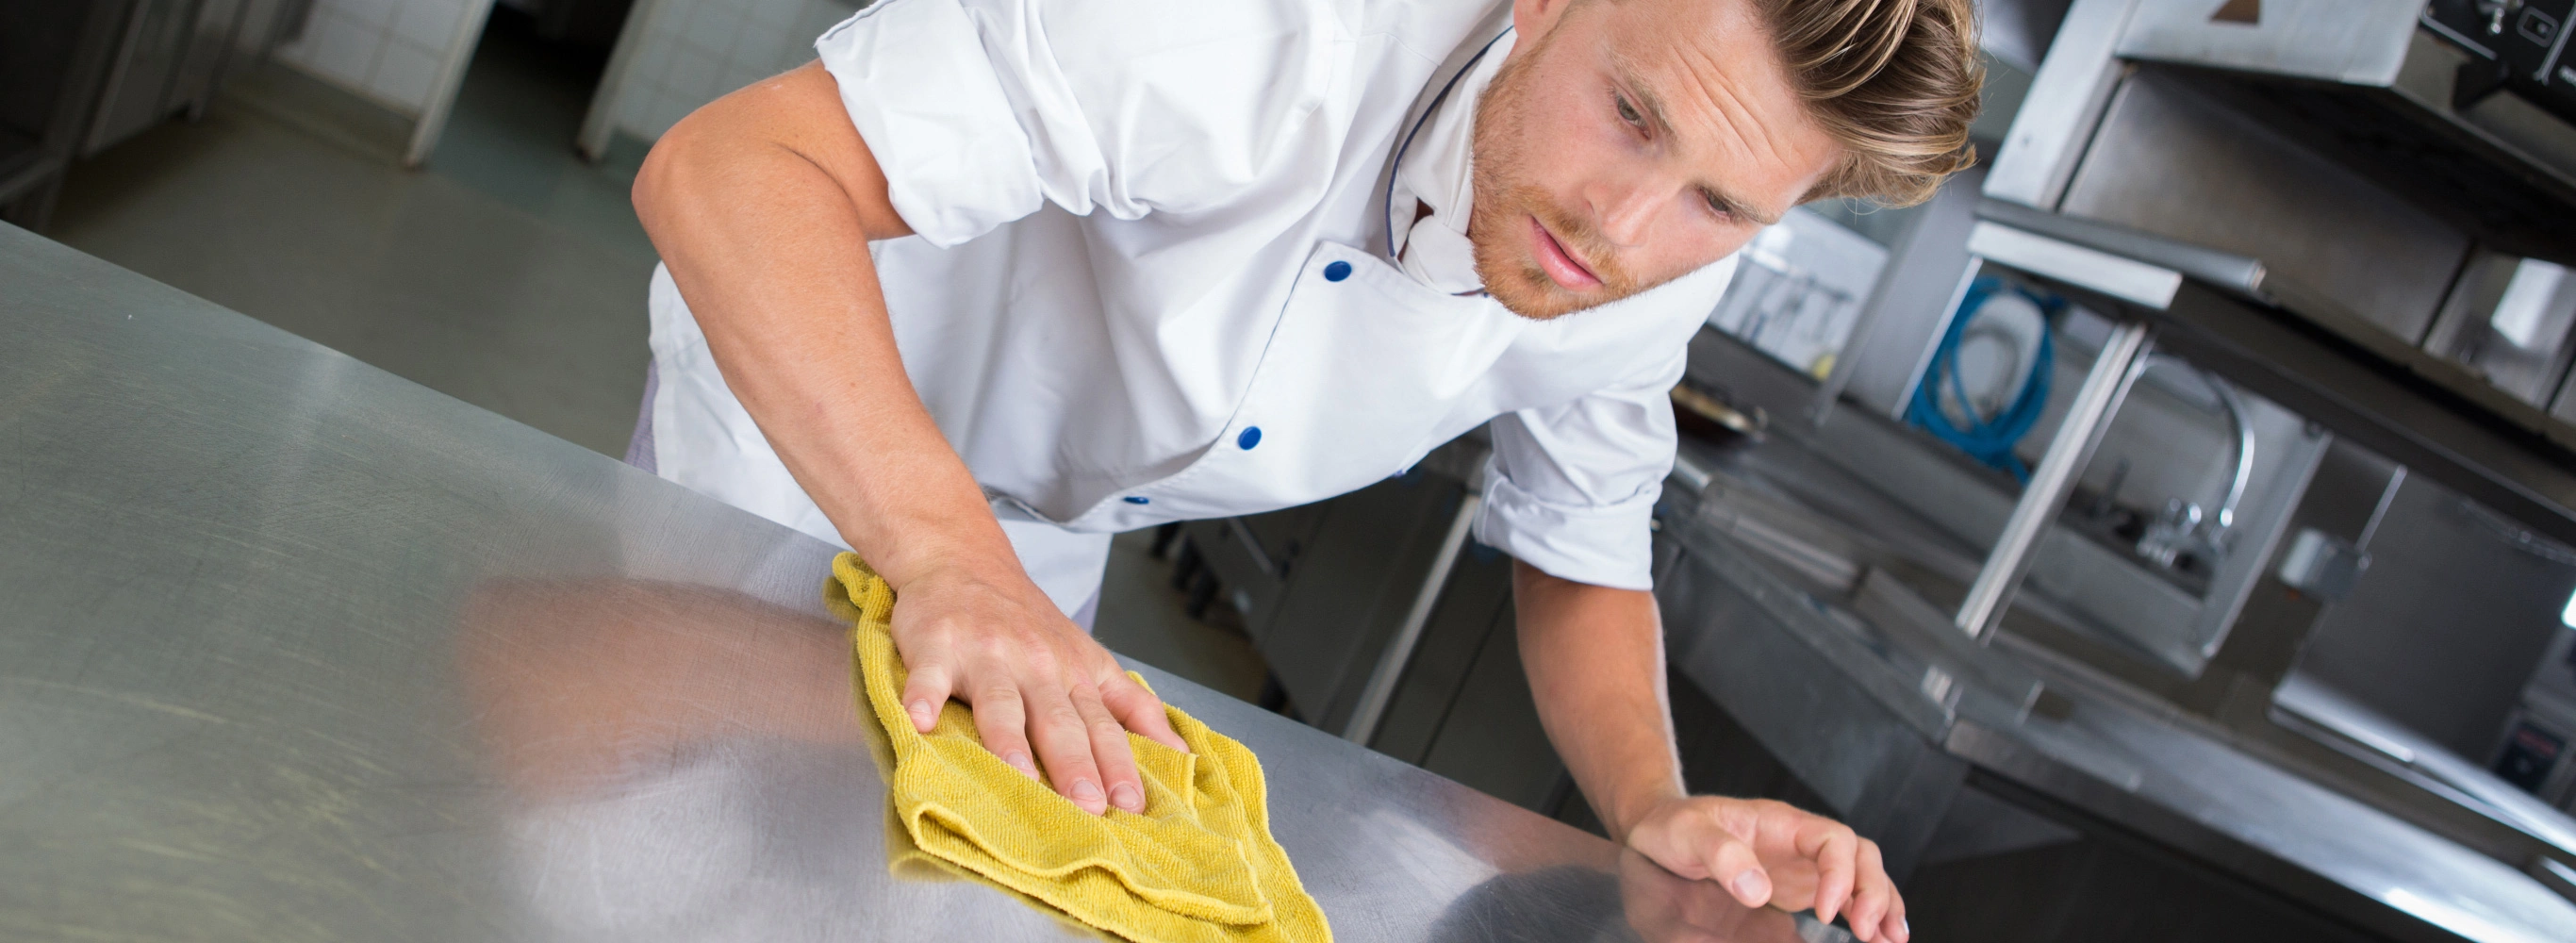 Restaurant cleaning solutions